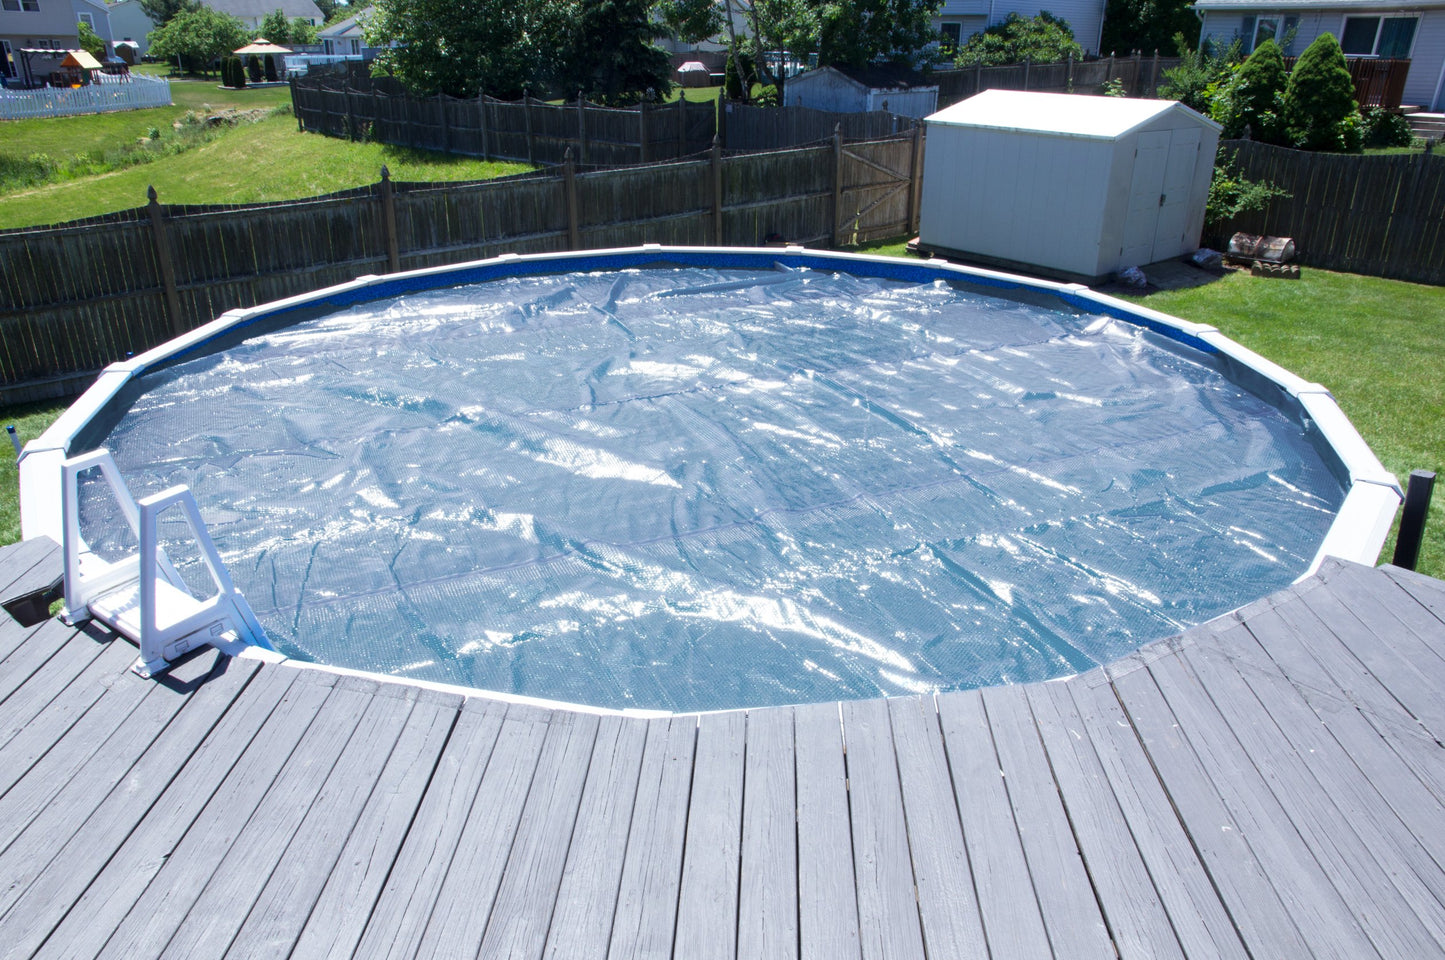 Sun2Solar Clear 27-Foot Round Solar Cover | 1200 Series | Heat Retaining Blanket for In-Ground and Above-Ground Round Swimming Pools | Use Sun to Heat Pool Water | Bubble-Side Facing Down in Pool 27' Round